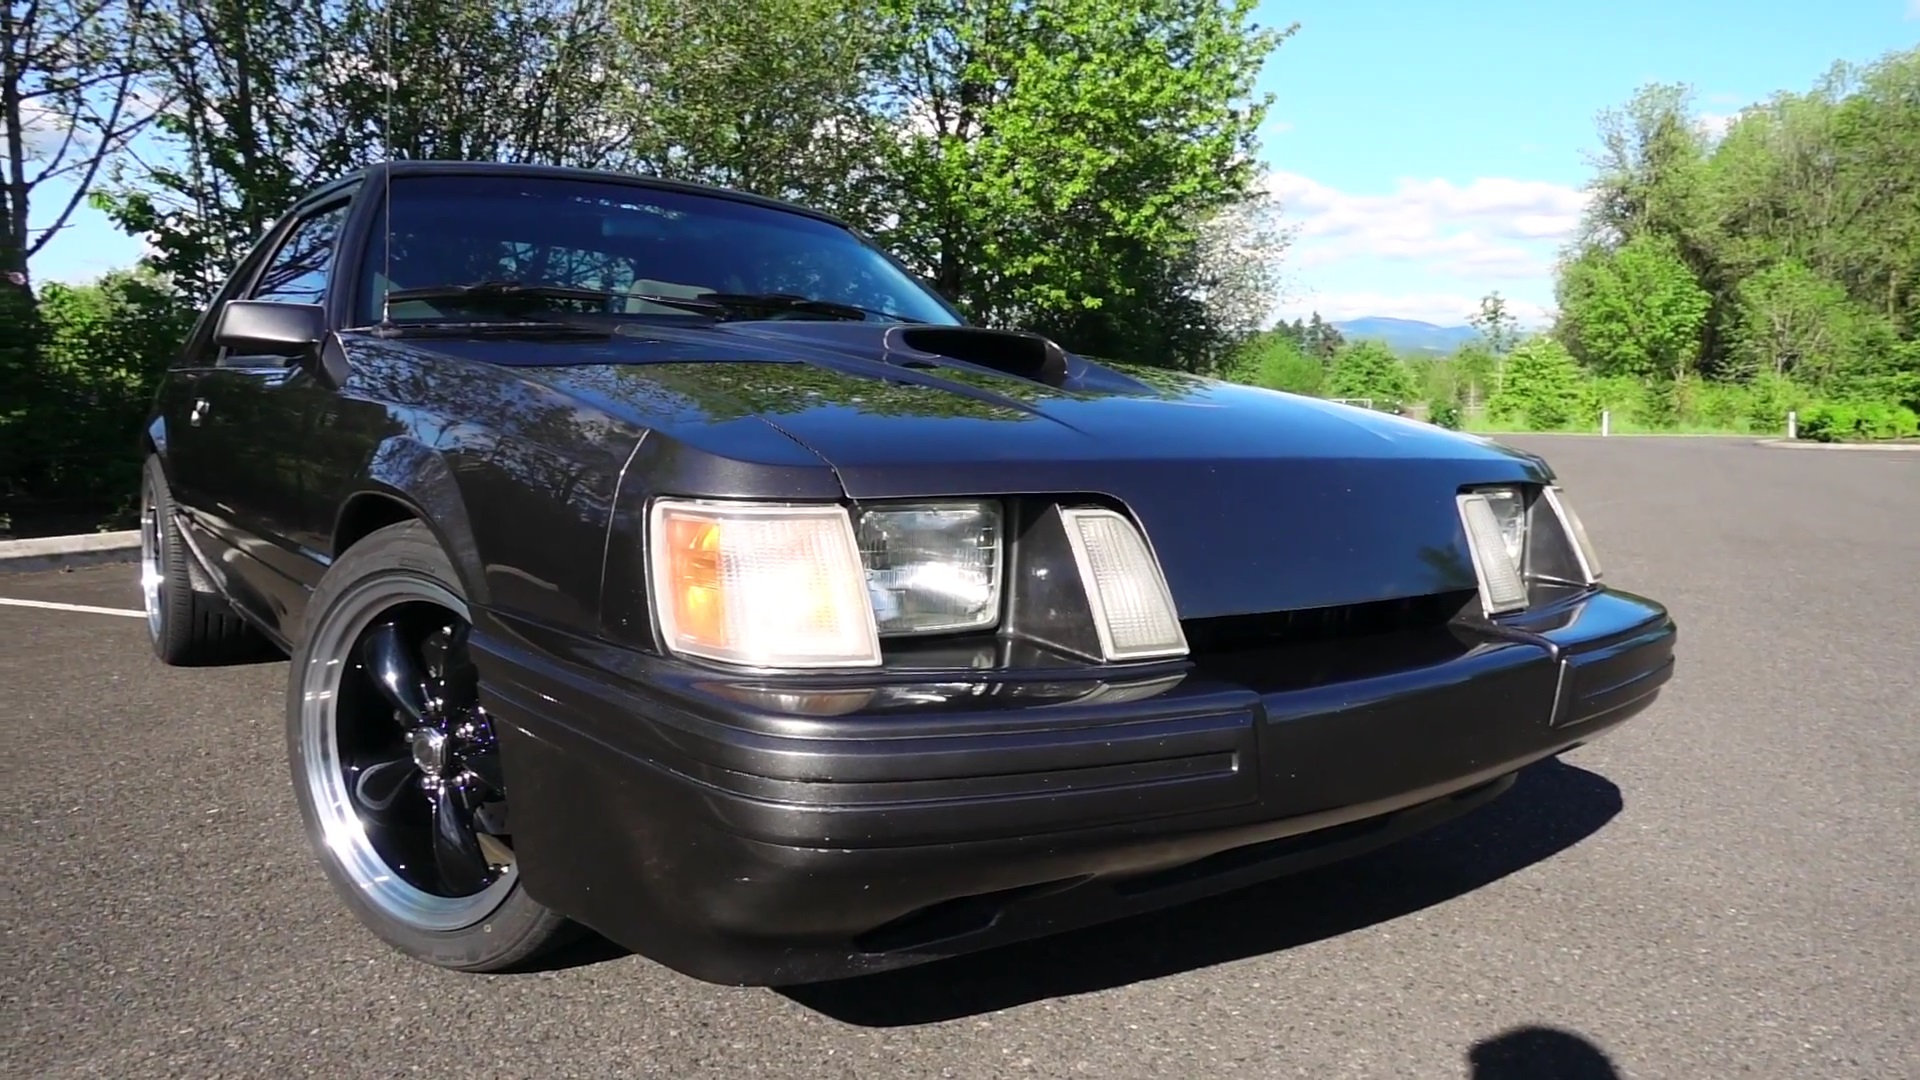 Video: 1984 Ford Mustang SVO Owner's Review